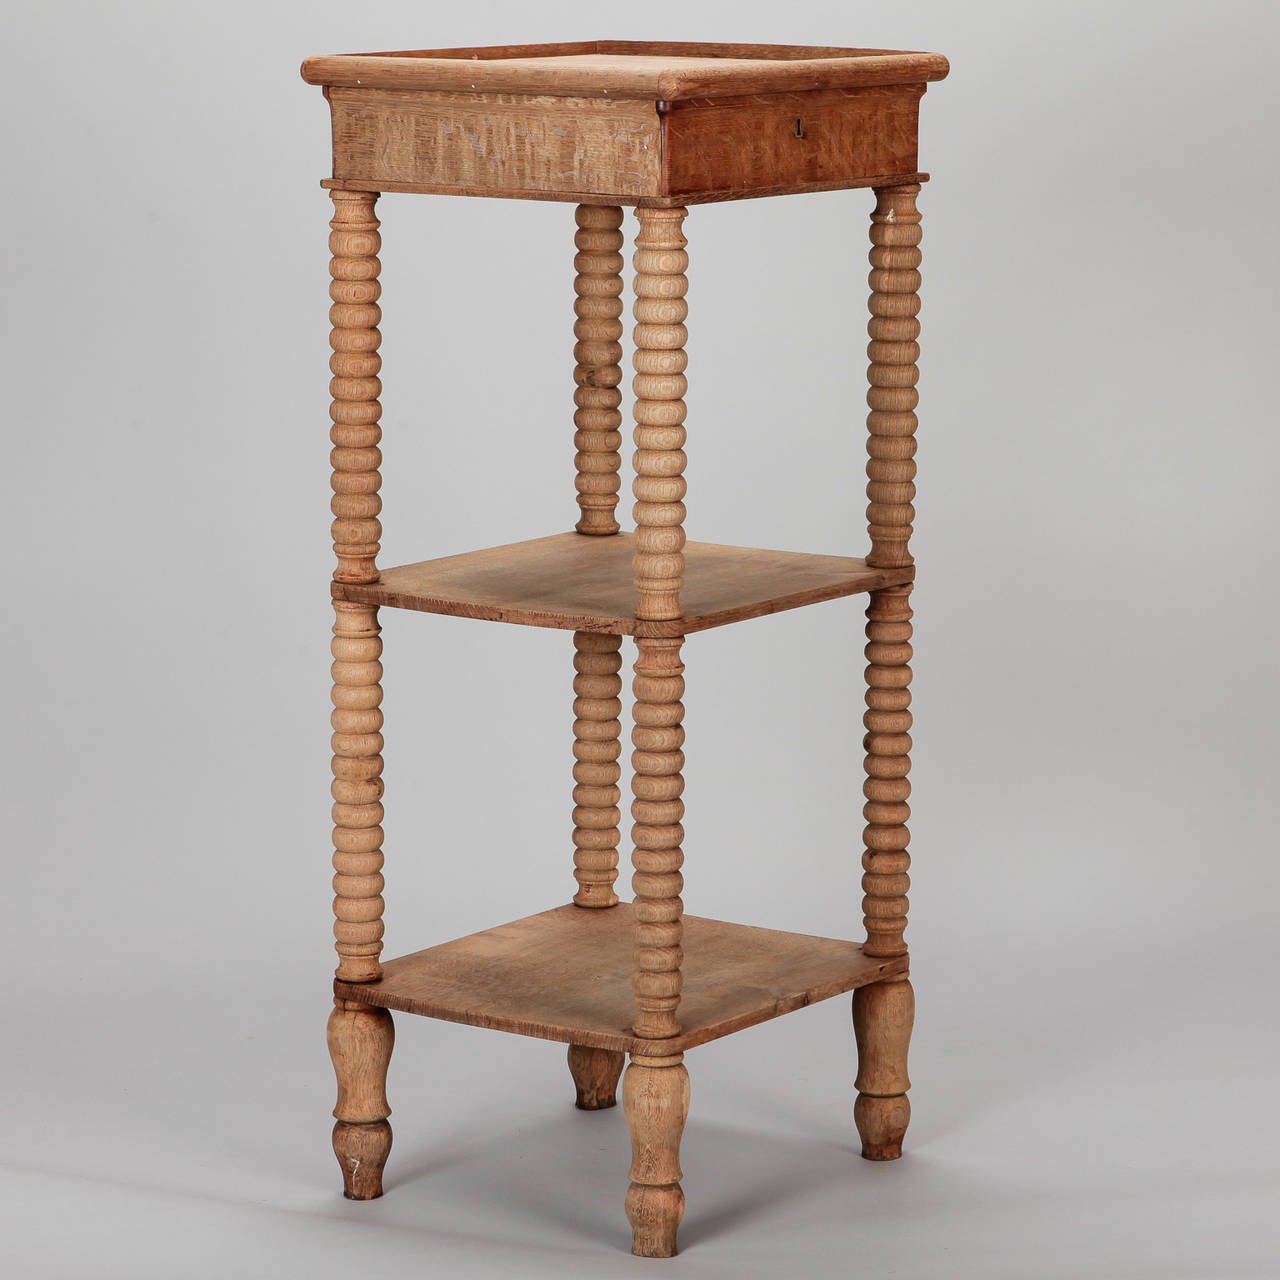 Bleached oak two tier small display table or étagère found in France. Turned bobbin style legs with two lower shelves and single, functional shallow drawer, circa 1900.